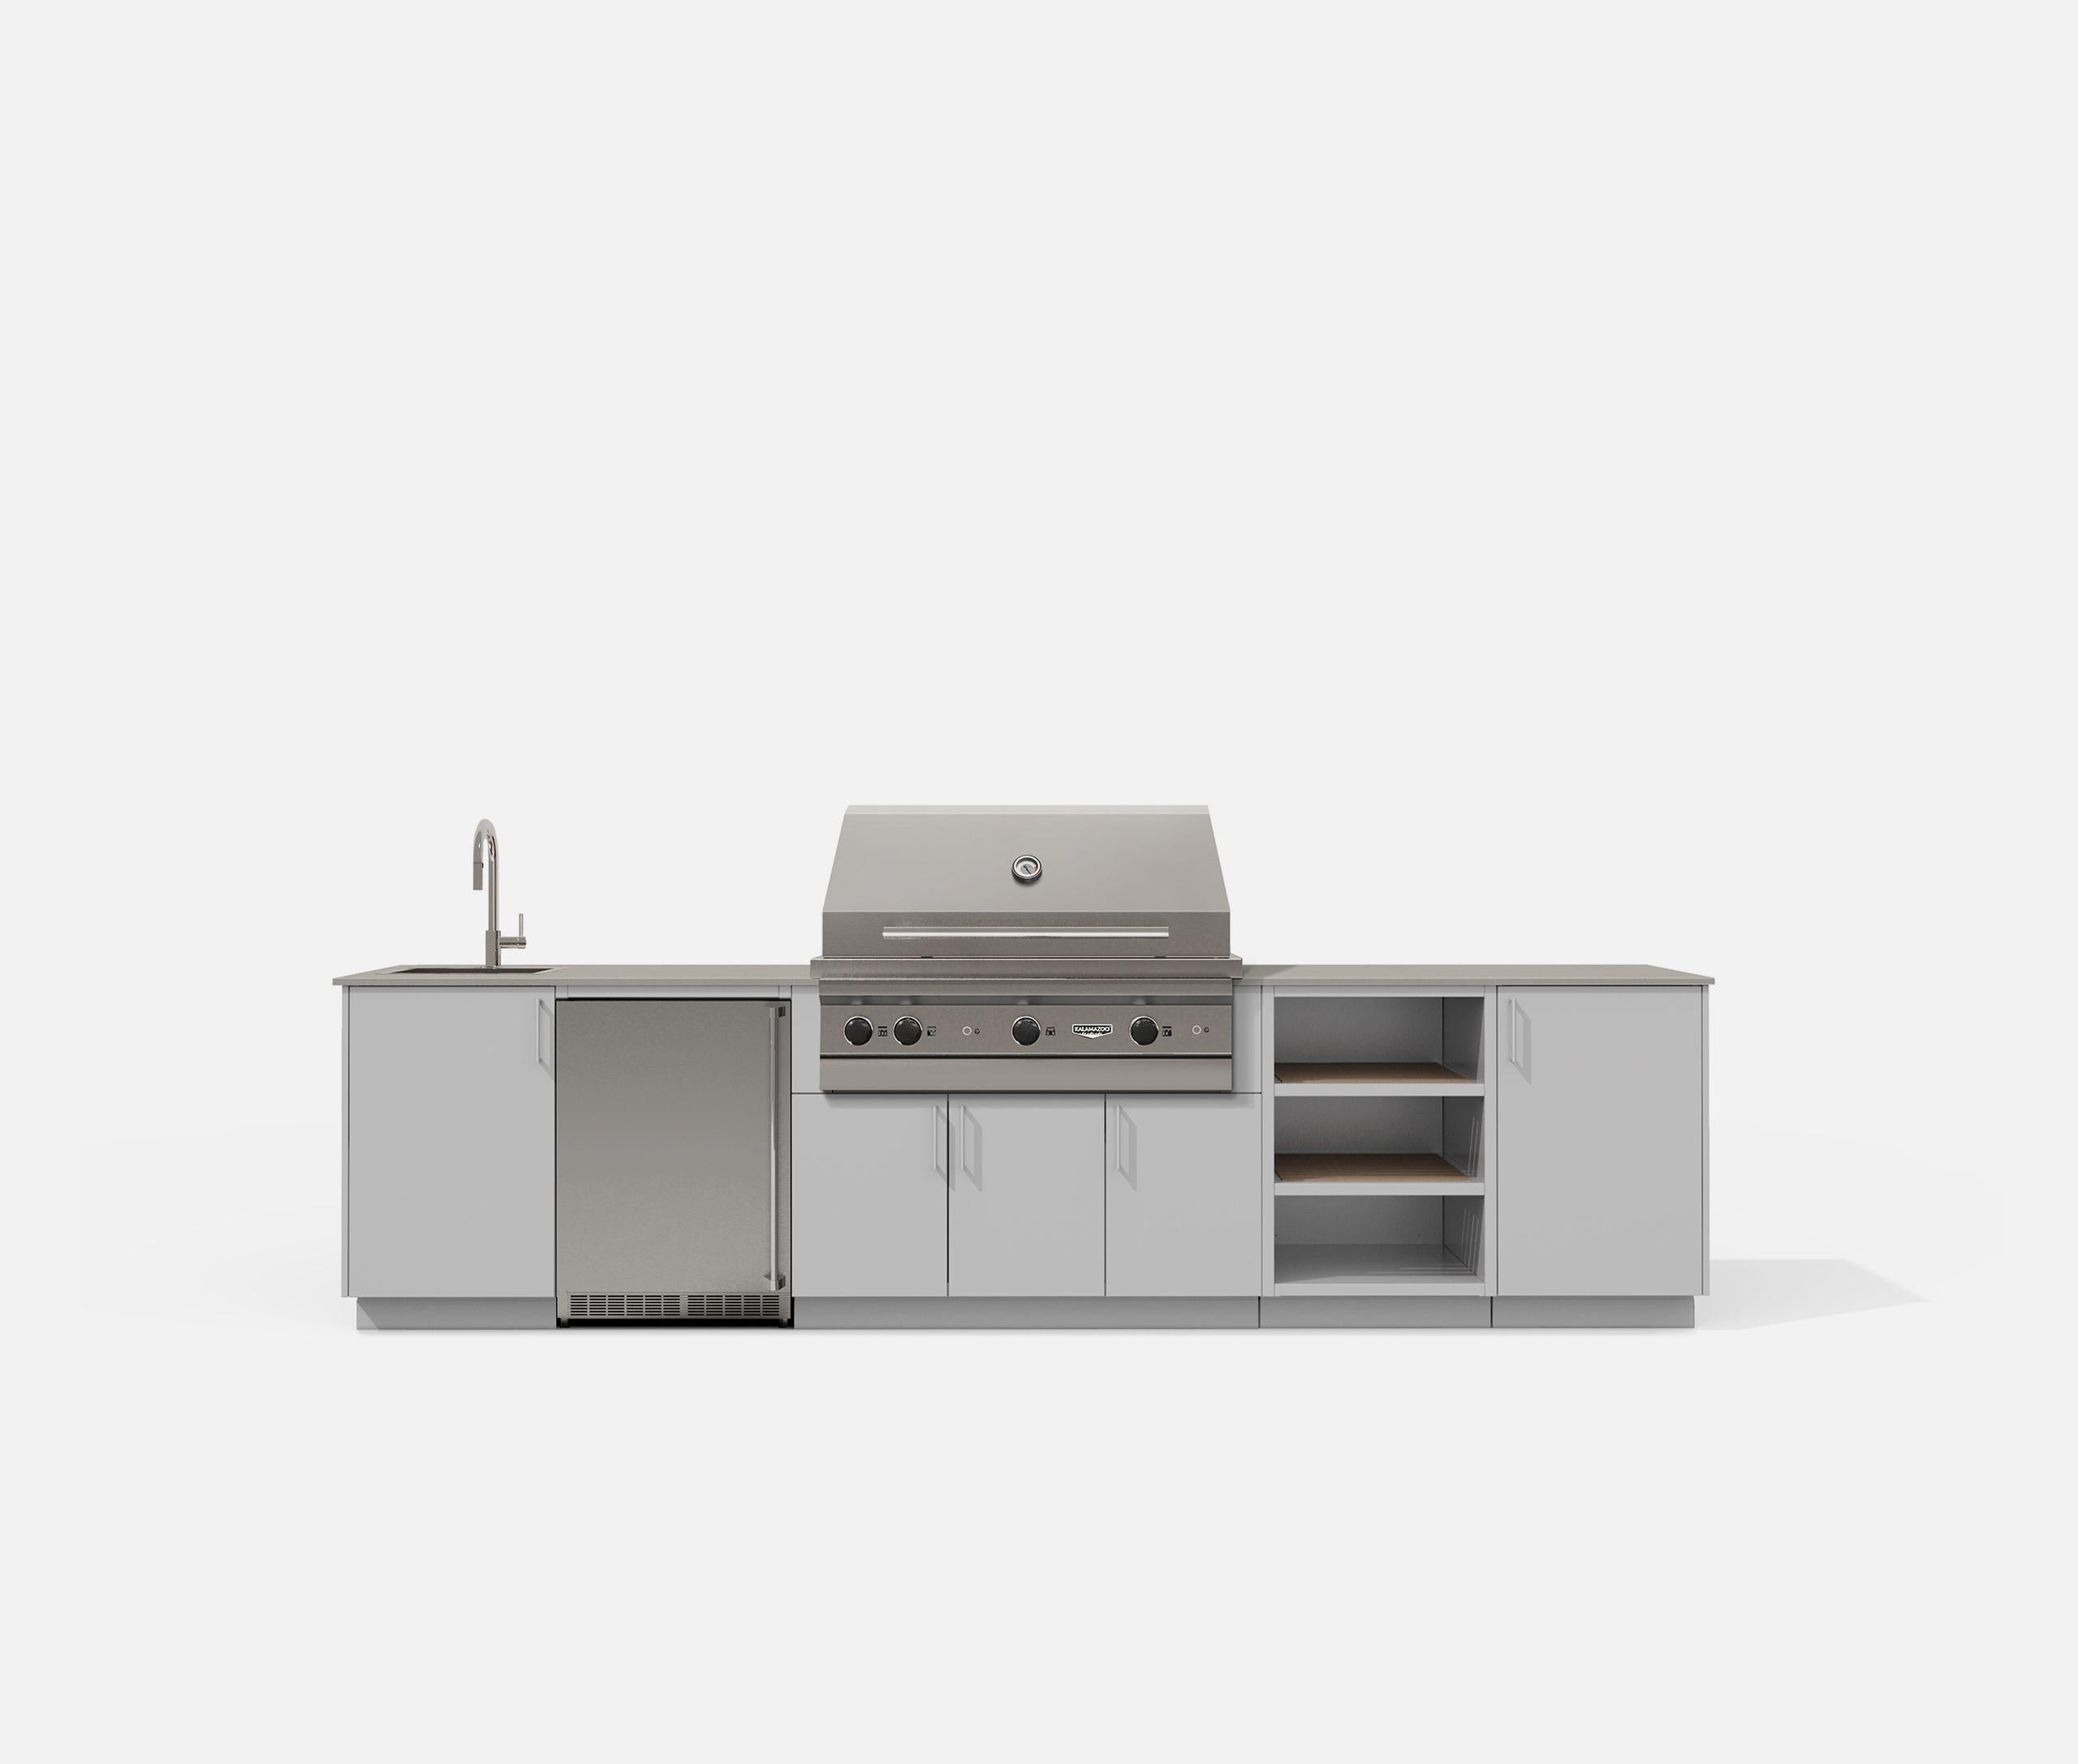 Urban Bonfire CTAHOE42CHANTILLY Tahoe 42 Outdoor Kitchen (Chantilly)GRILL SOLD SEPARATELY